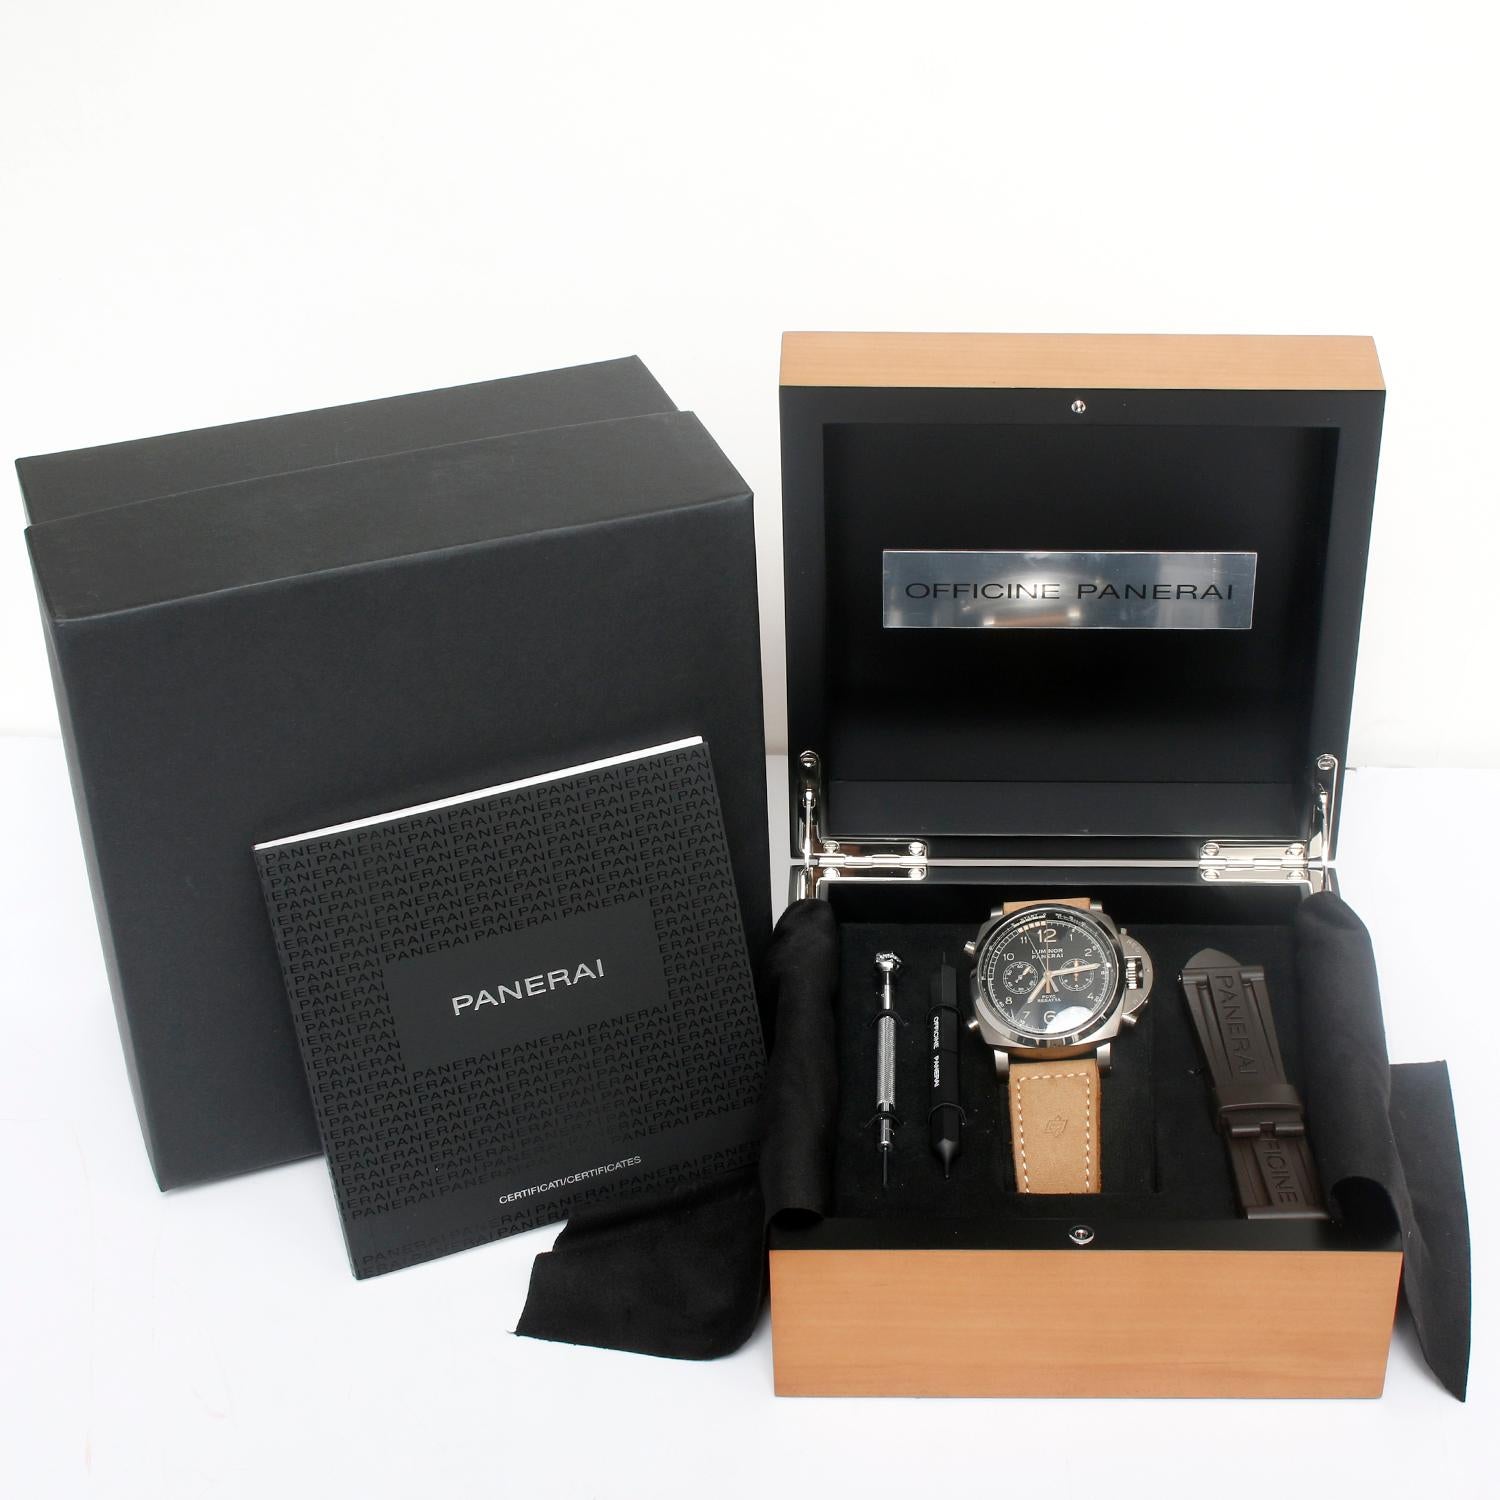 Panerai Luminor 1950  PCYC Regatta 3 Days Titanium Men's Watch PAM 00652 - Automatic chronograph. Brushed titanium ( 47 mm ). Black dial with Arabic numerals hour markers with minute markers around outer rim ; 2 sub-dials. Brown calfskin leather